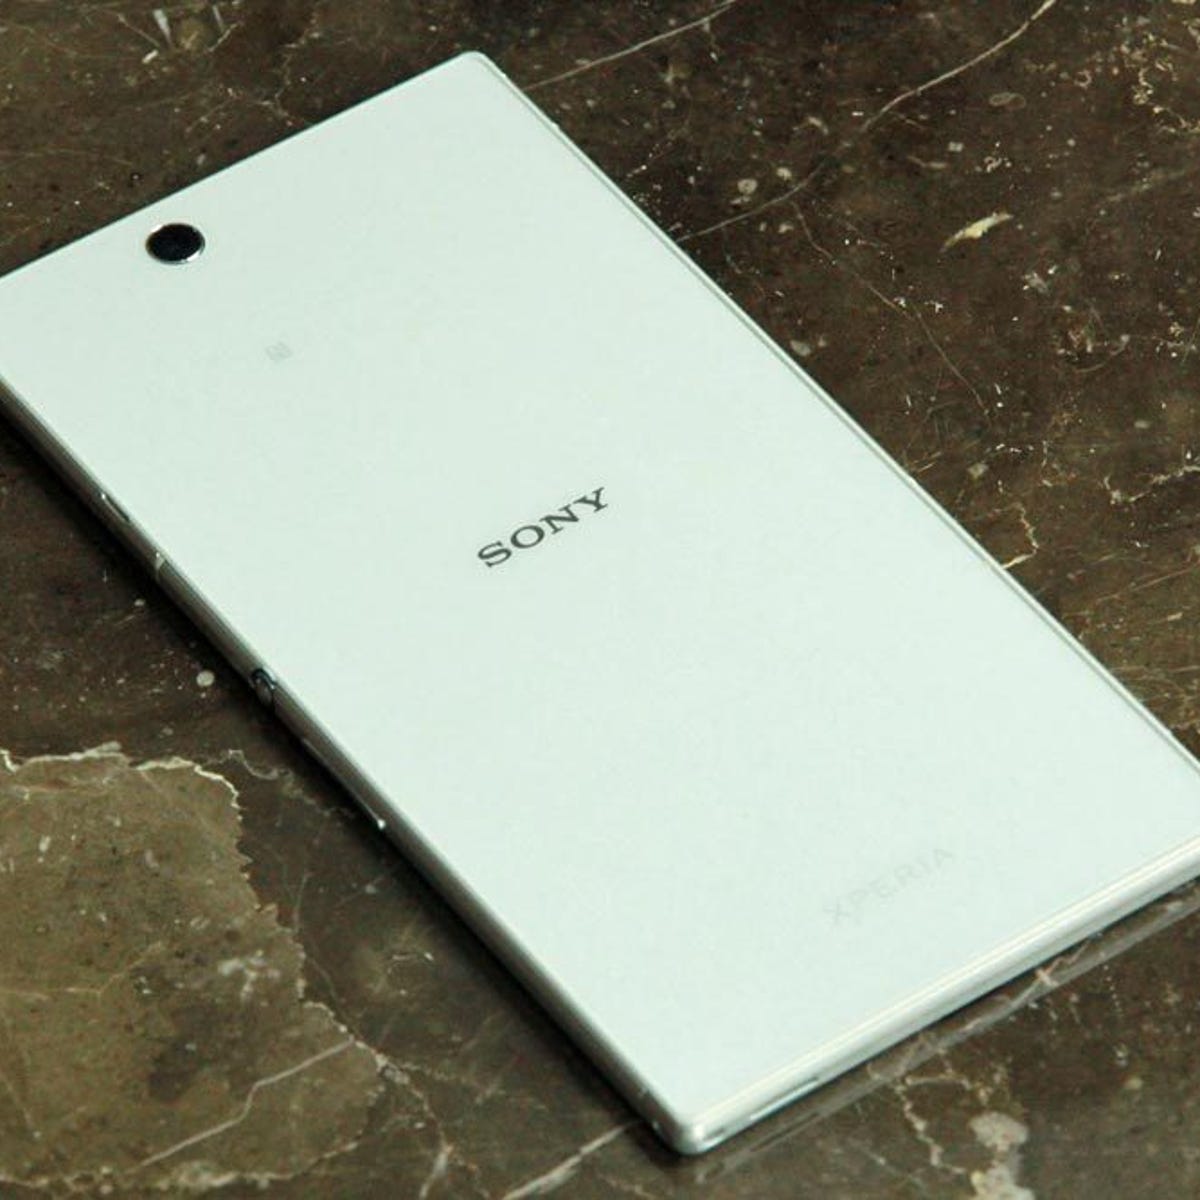 Sony Xperia Z Ultra review: Z Ultra: one phablet to rule them all (hands-on) - CNET